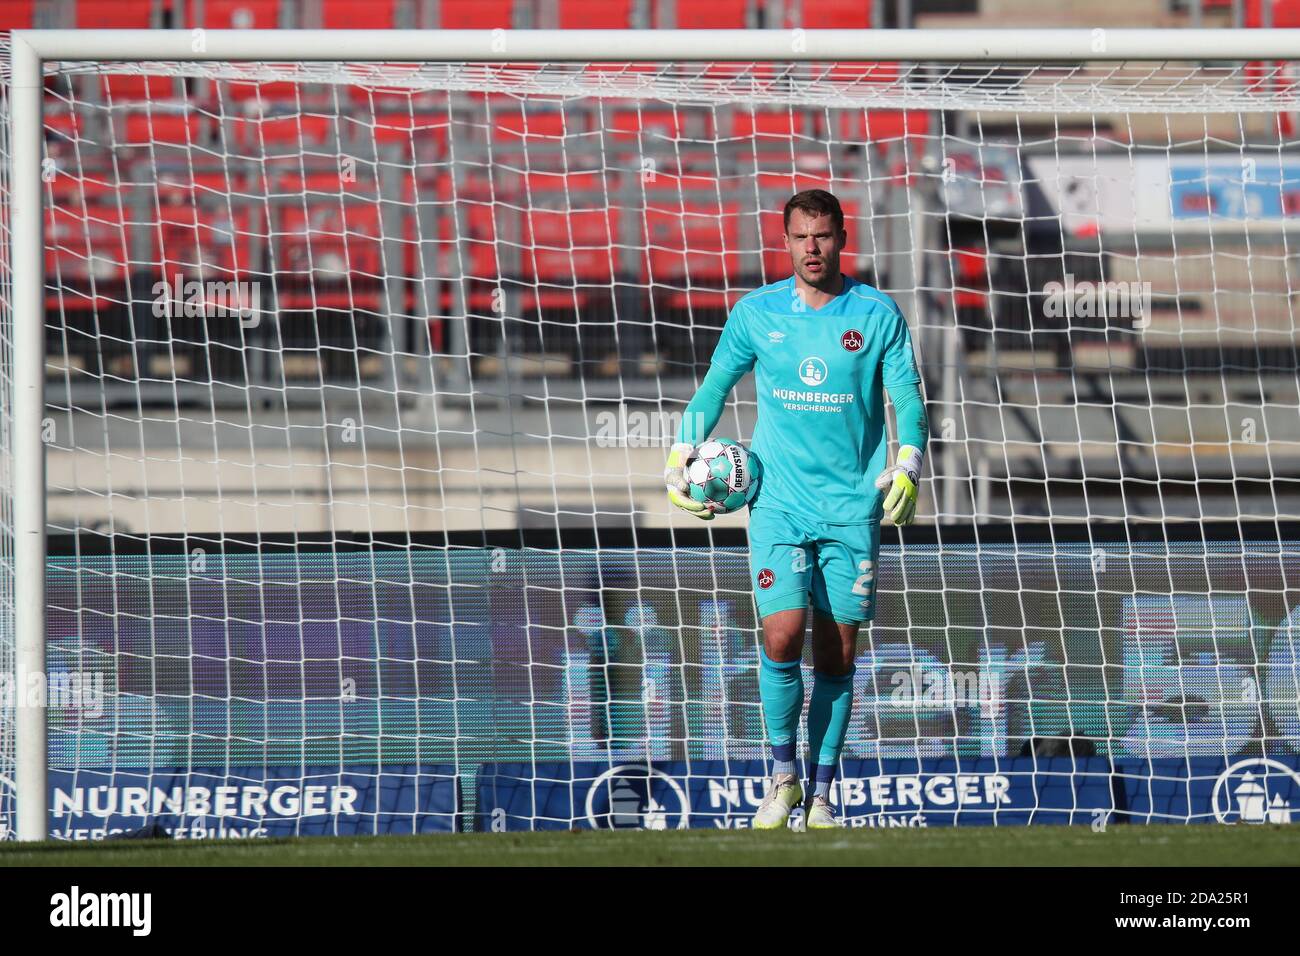 Nuremberg, Germany. 07th Nov, 2020. Football: 2nd Bundesliga, 1st FC Nuremberg - Fortuna Düsseldorf, 7th matchday at the Max Morlock Stadium. The Nuremberg goalkeeper Christian Mathenia. Credit: Daniel Karmann/dpa - IMPORTANT NOTE: In accordance with the regulations of the DFL Deutsche Fußball Liga and the DFB Deutscher Fußball-Bund, it is prohibited to exploit or have exploited in the stadium and/or from the game taken photographs in the form of sequence images and/or video-like photo series./dpa/Alamy Live News Stock Photo